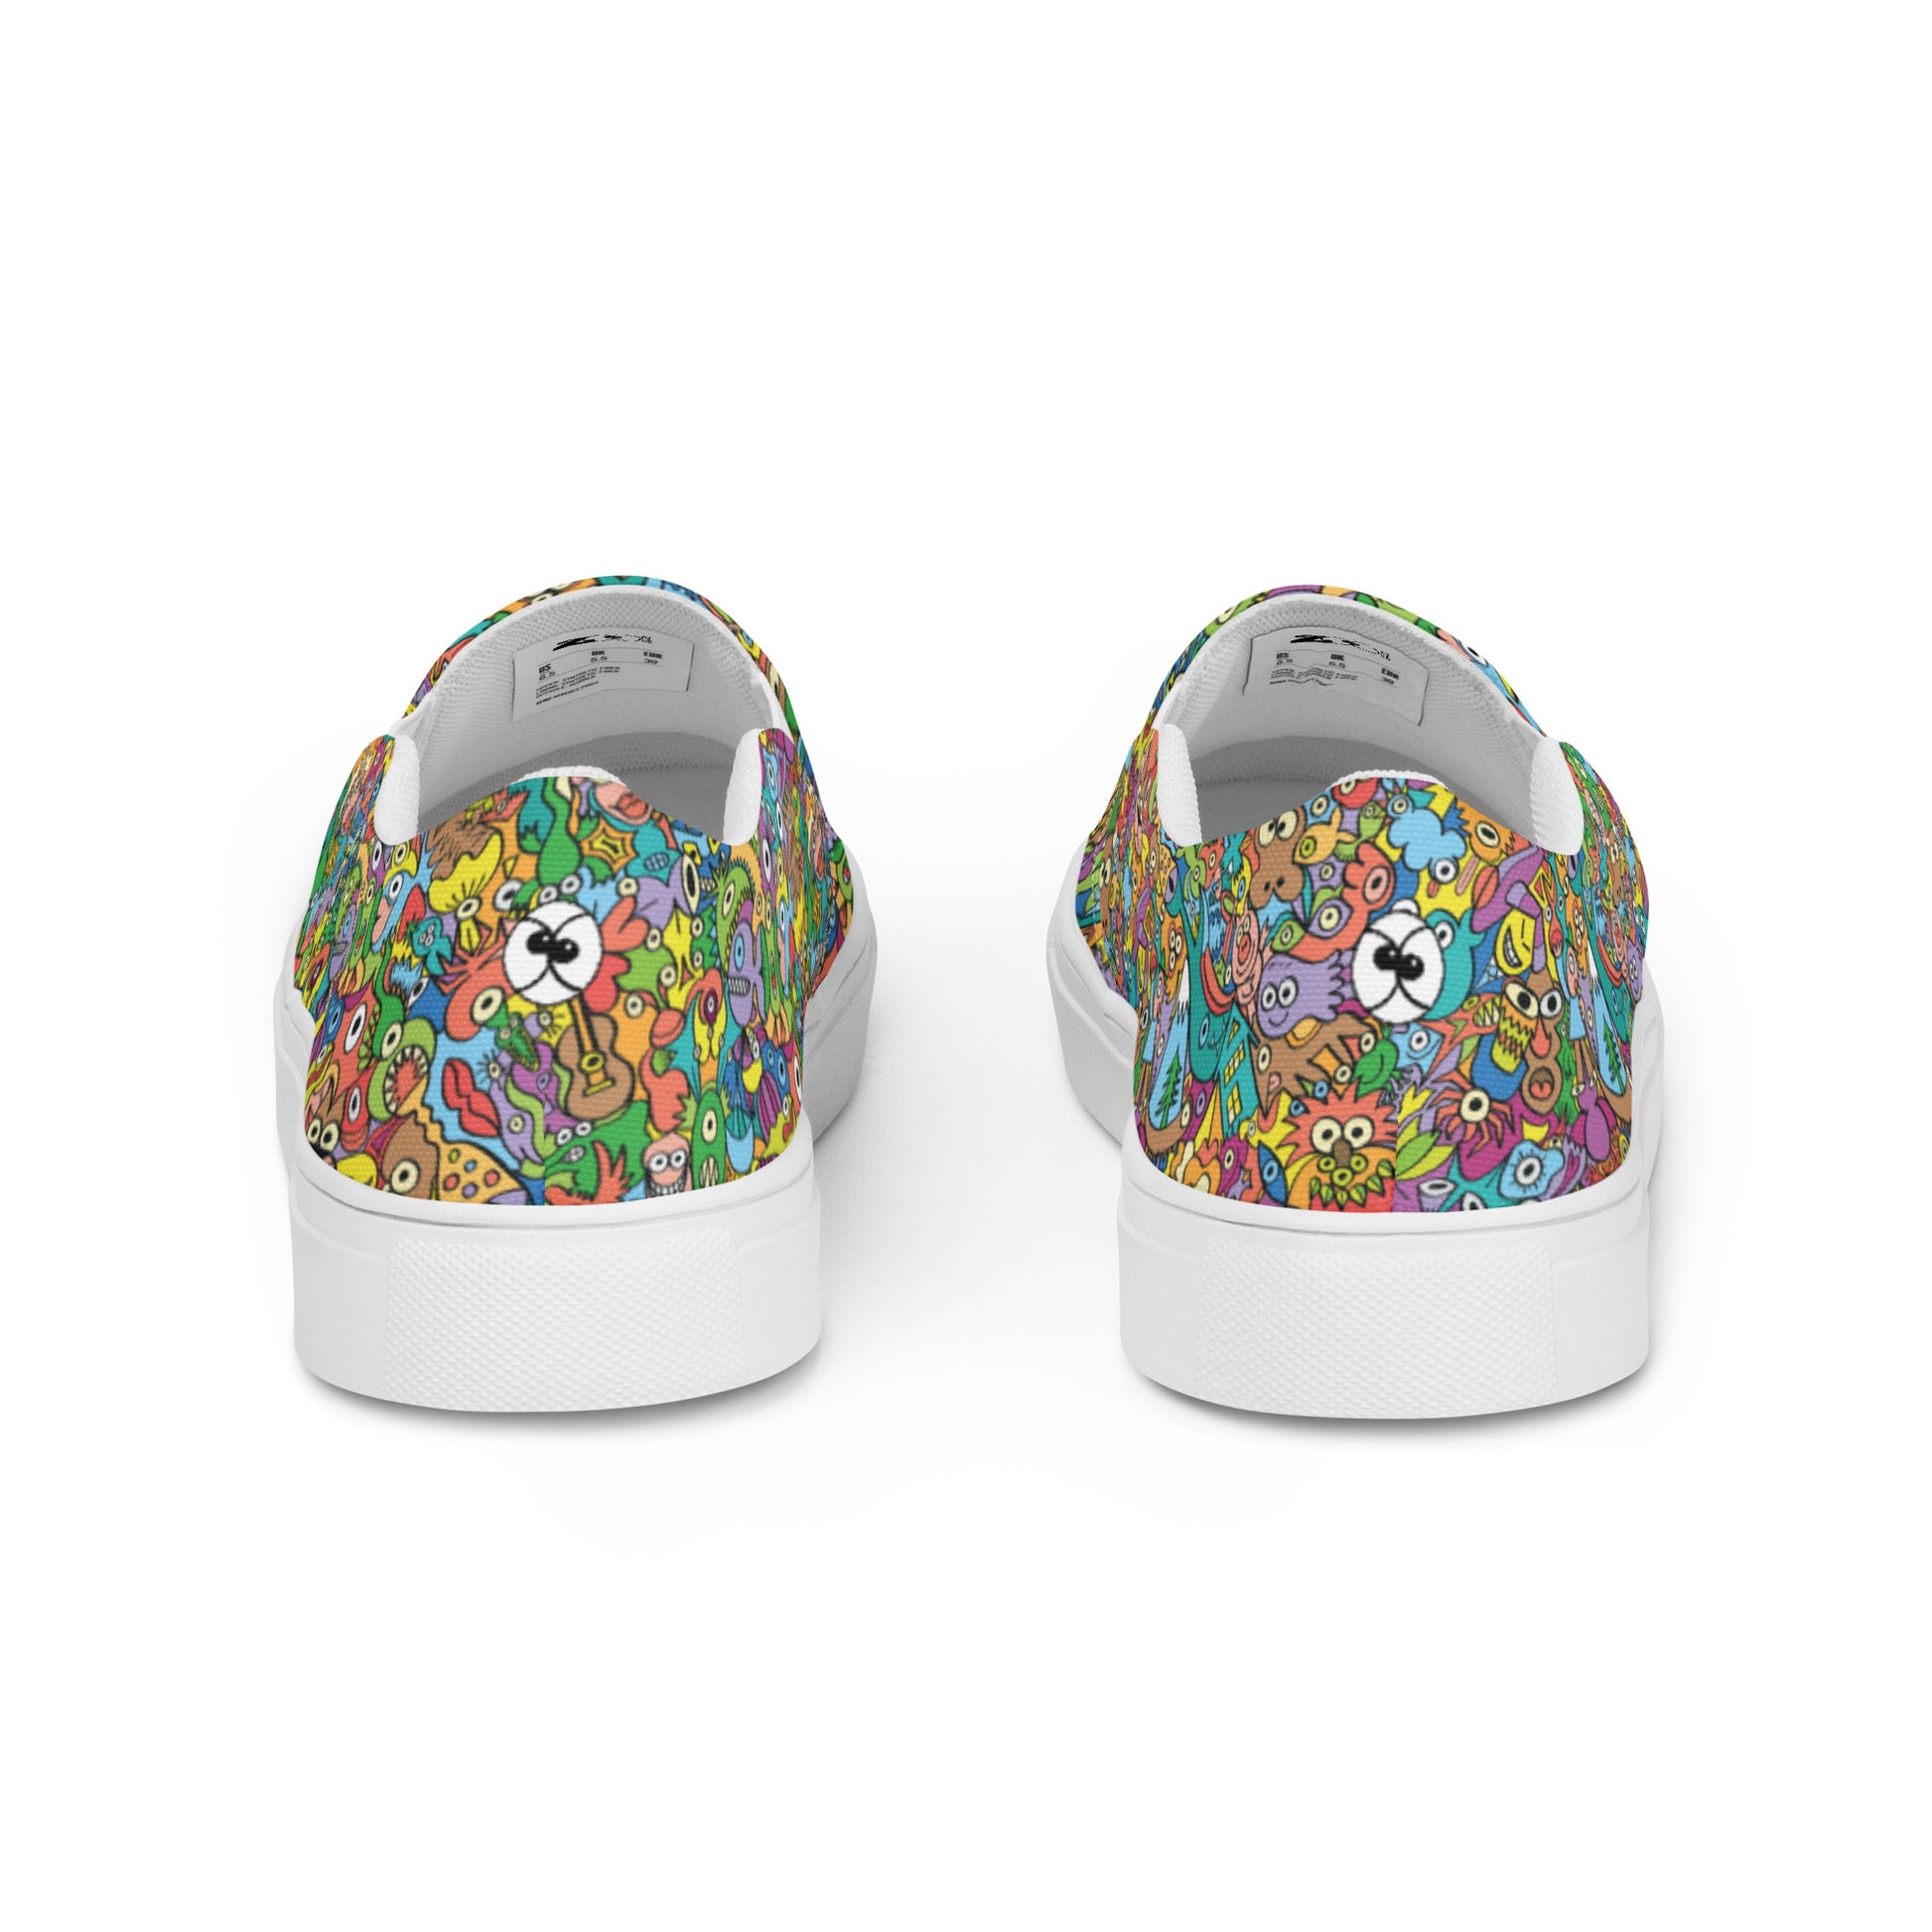 Cheerful crowd enjoying a lively carnival Women’s slip-on canvas shoes. Back view